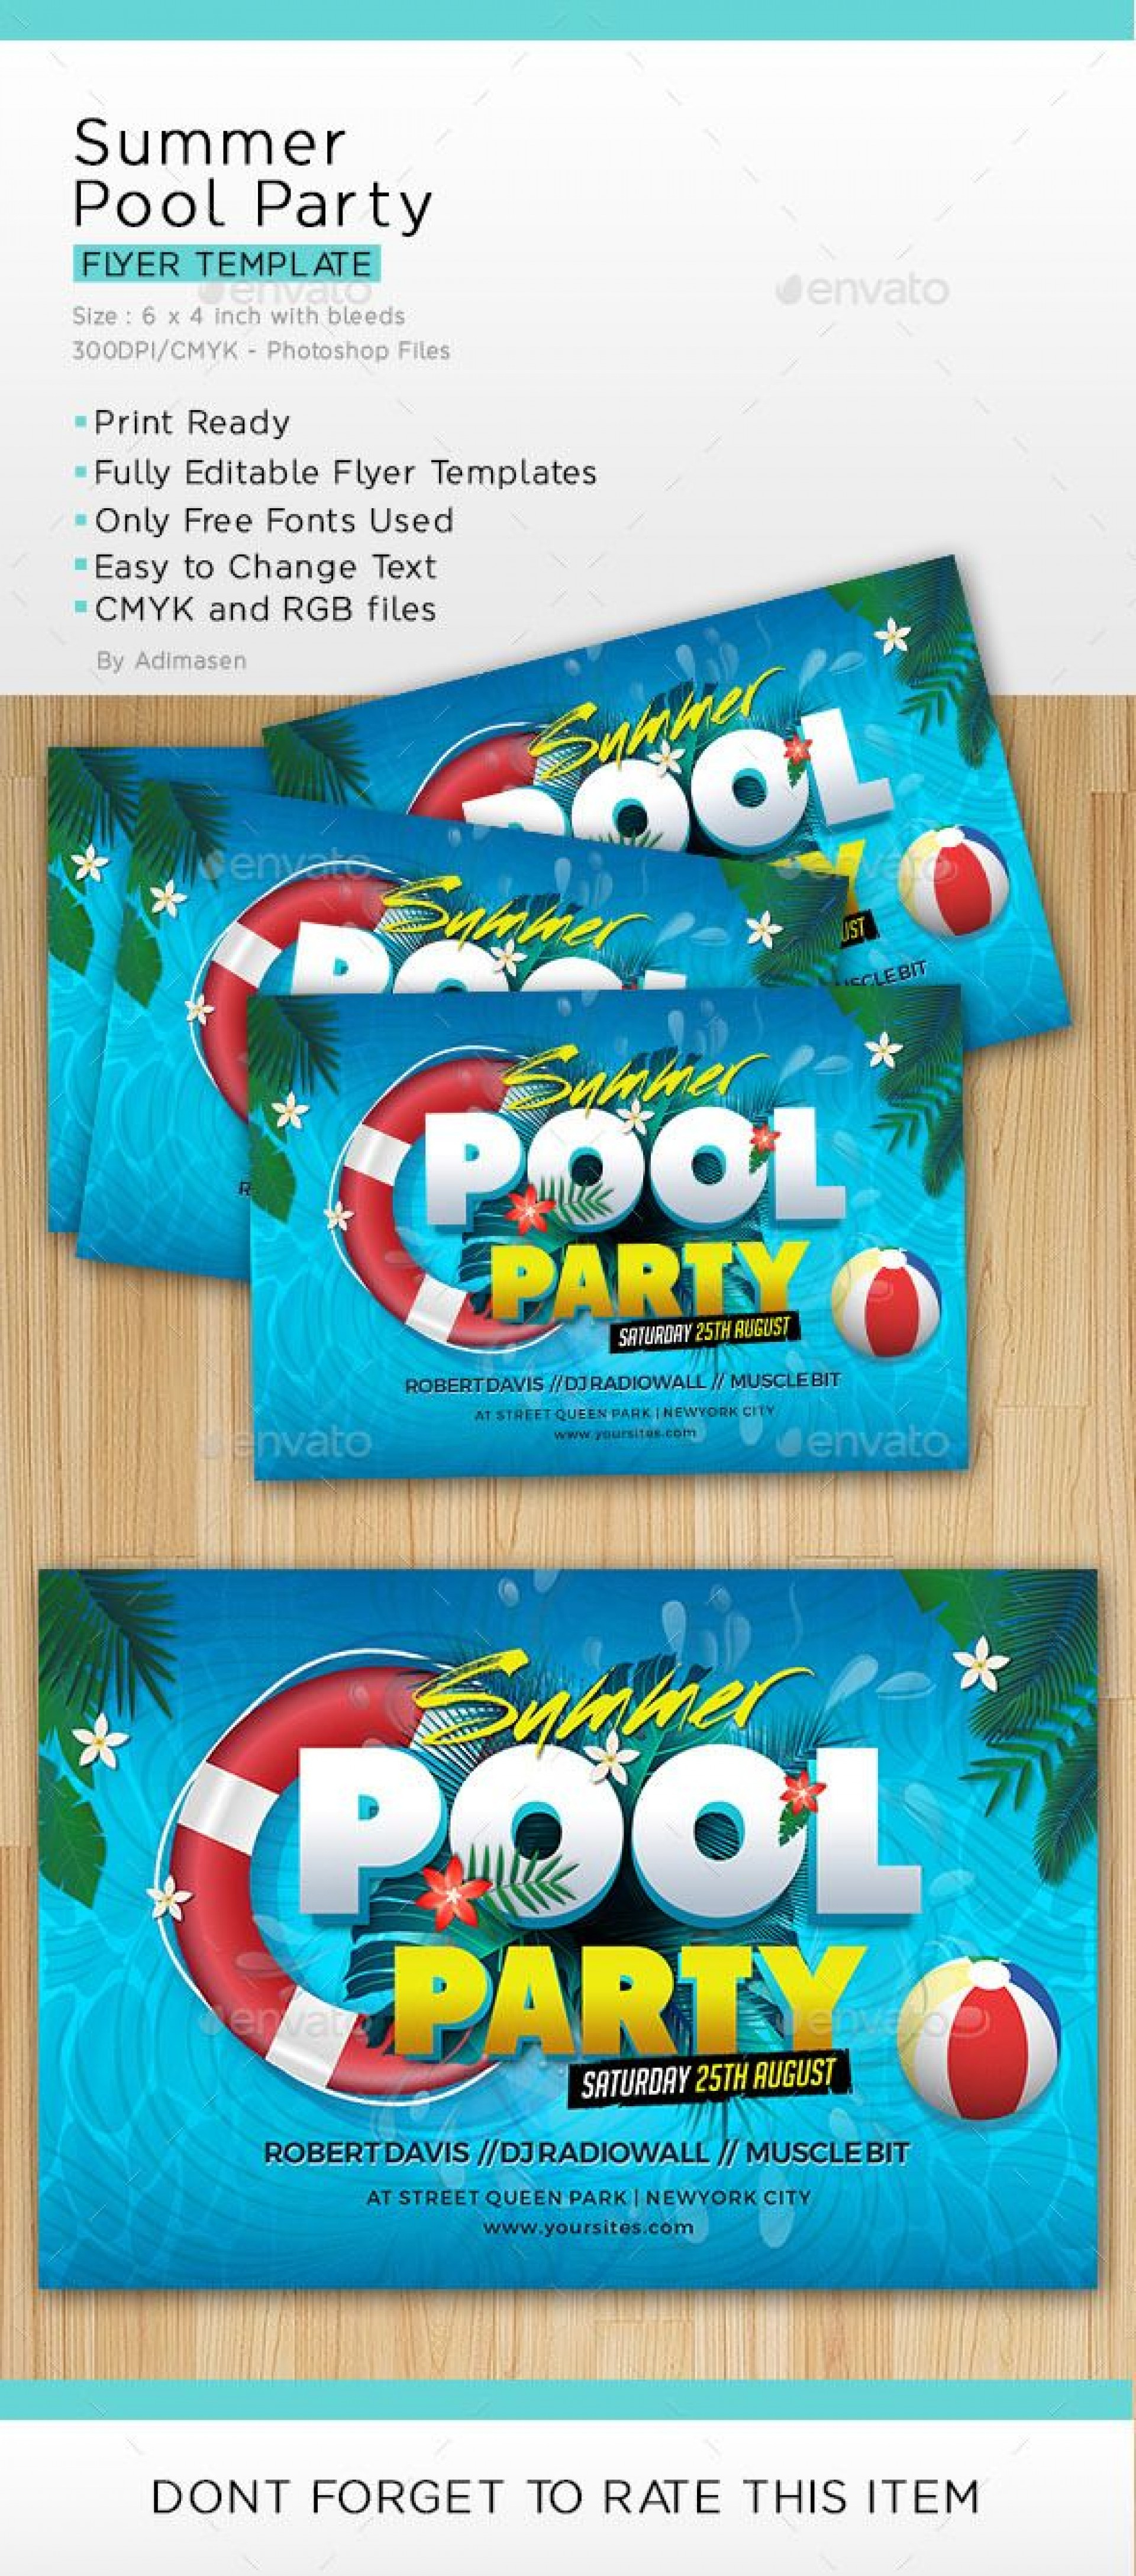 006 Template Ideas Pool Party Flyer Free Preview ~ Ulyssesroom - Pool Party Flyers Free Printable